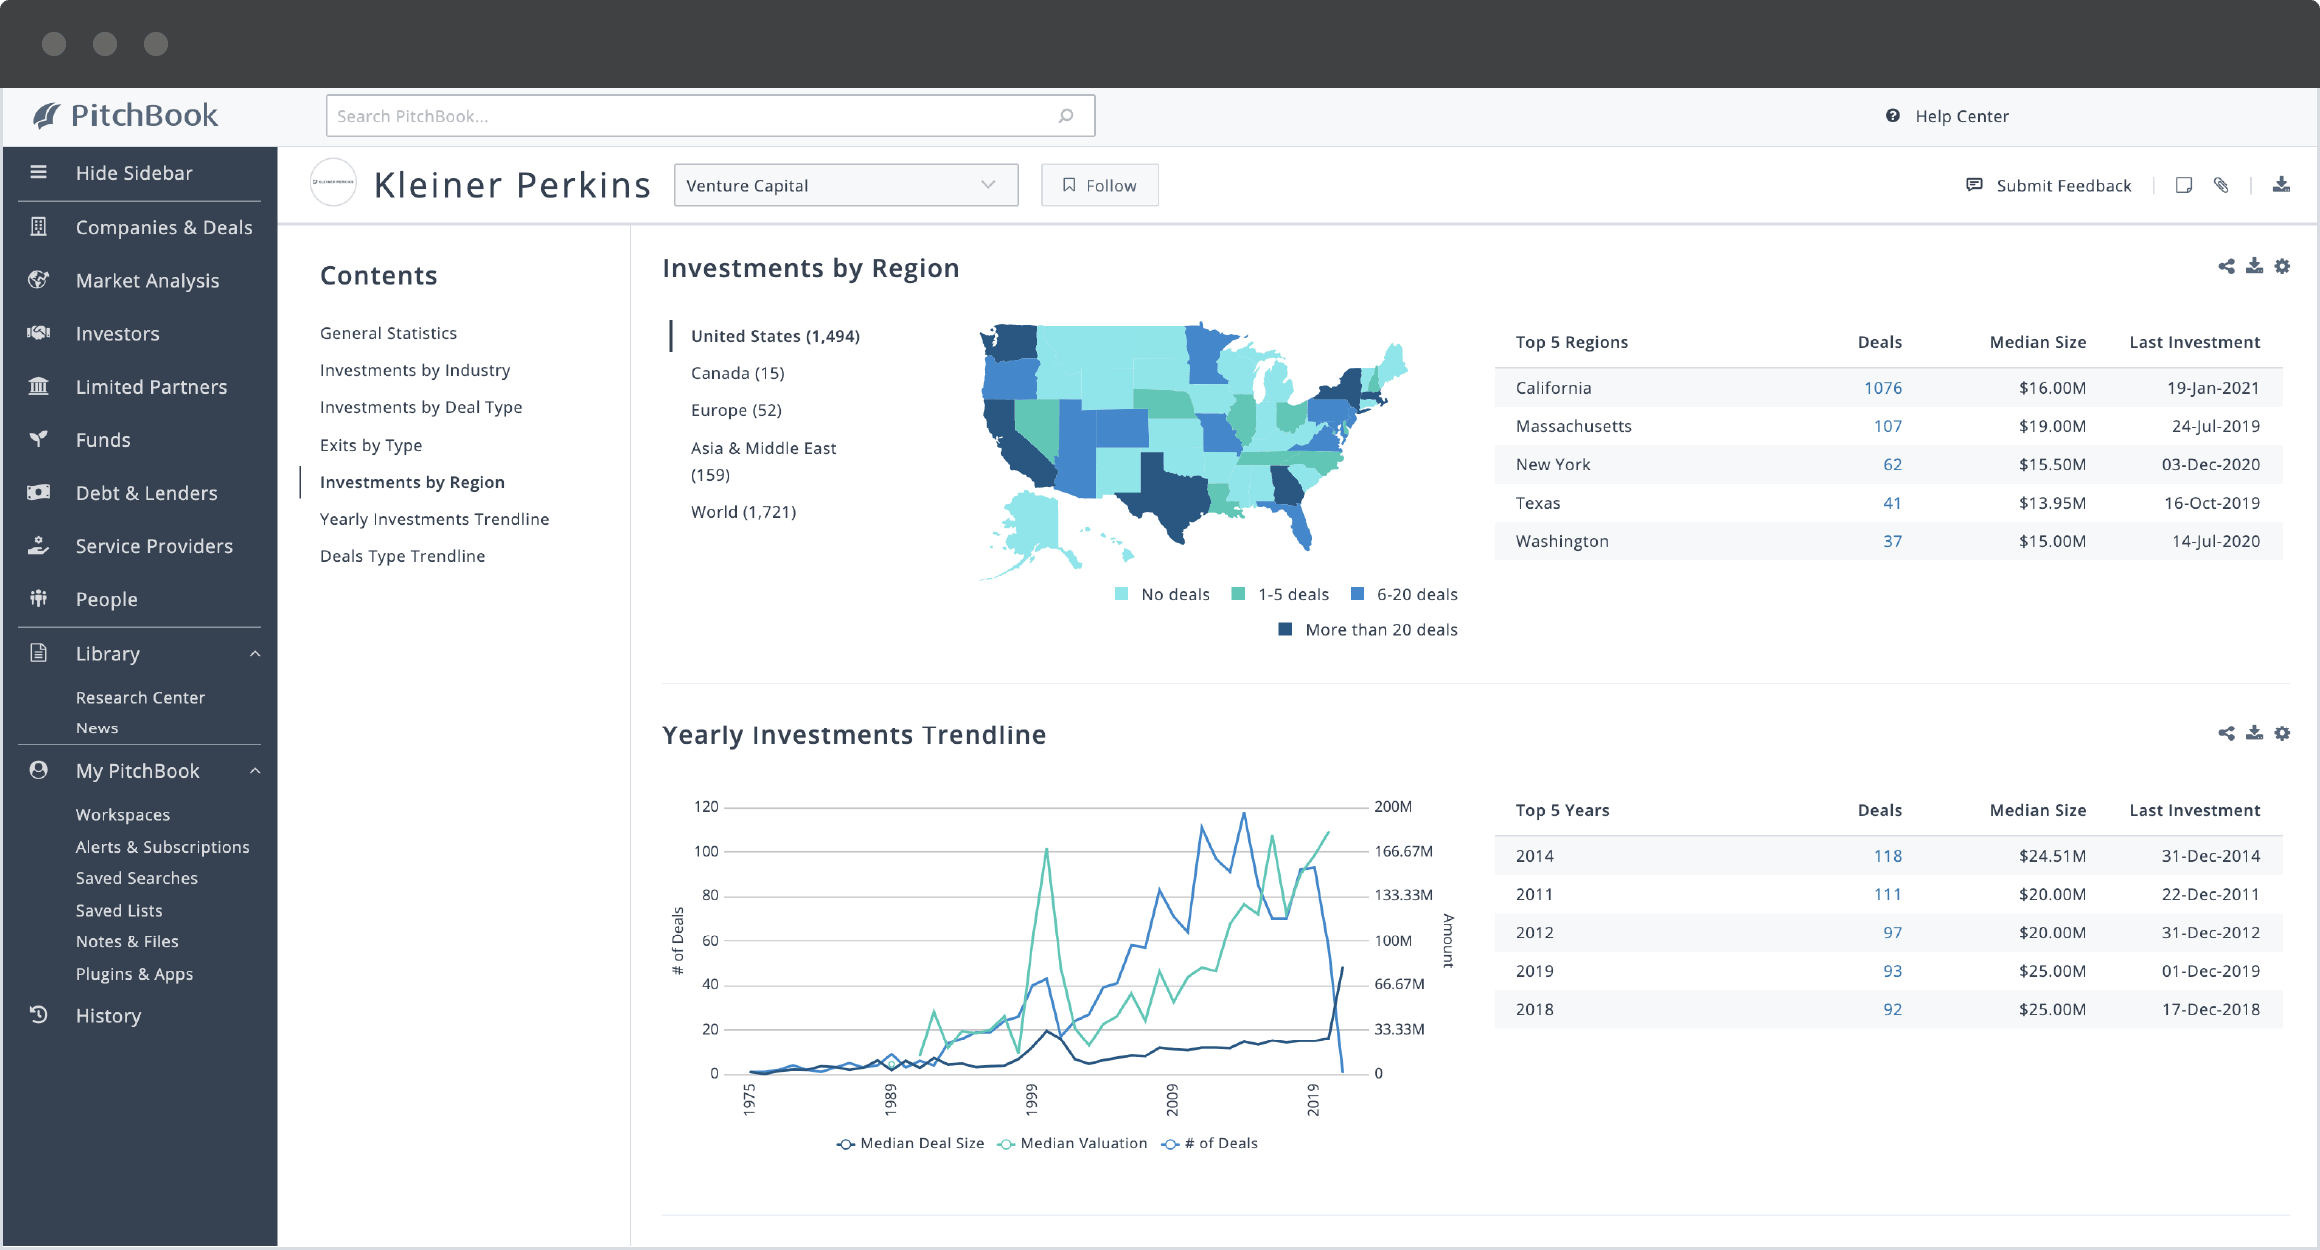 PitchBook investor profile showing Kleiner Perkins’ investments by region and yearly investments trendline.